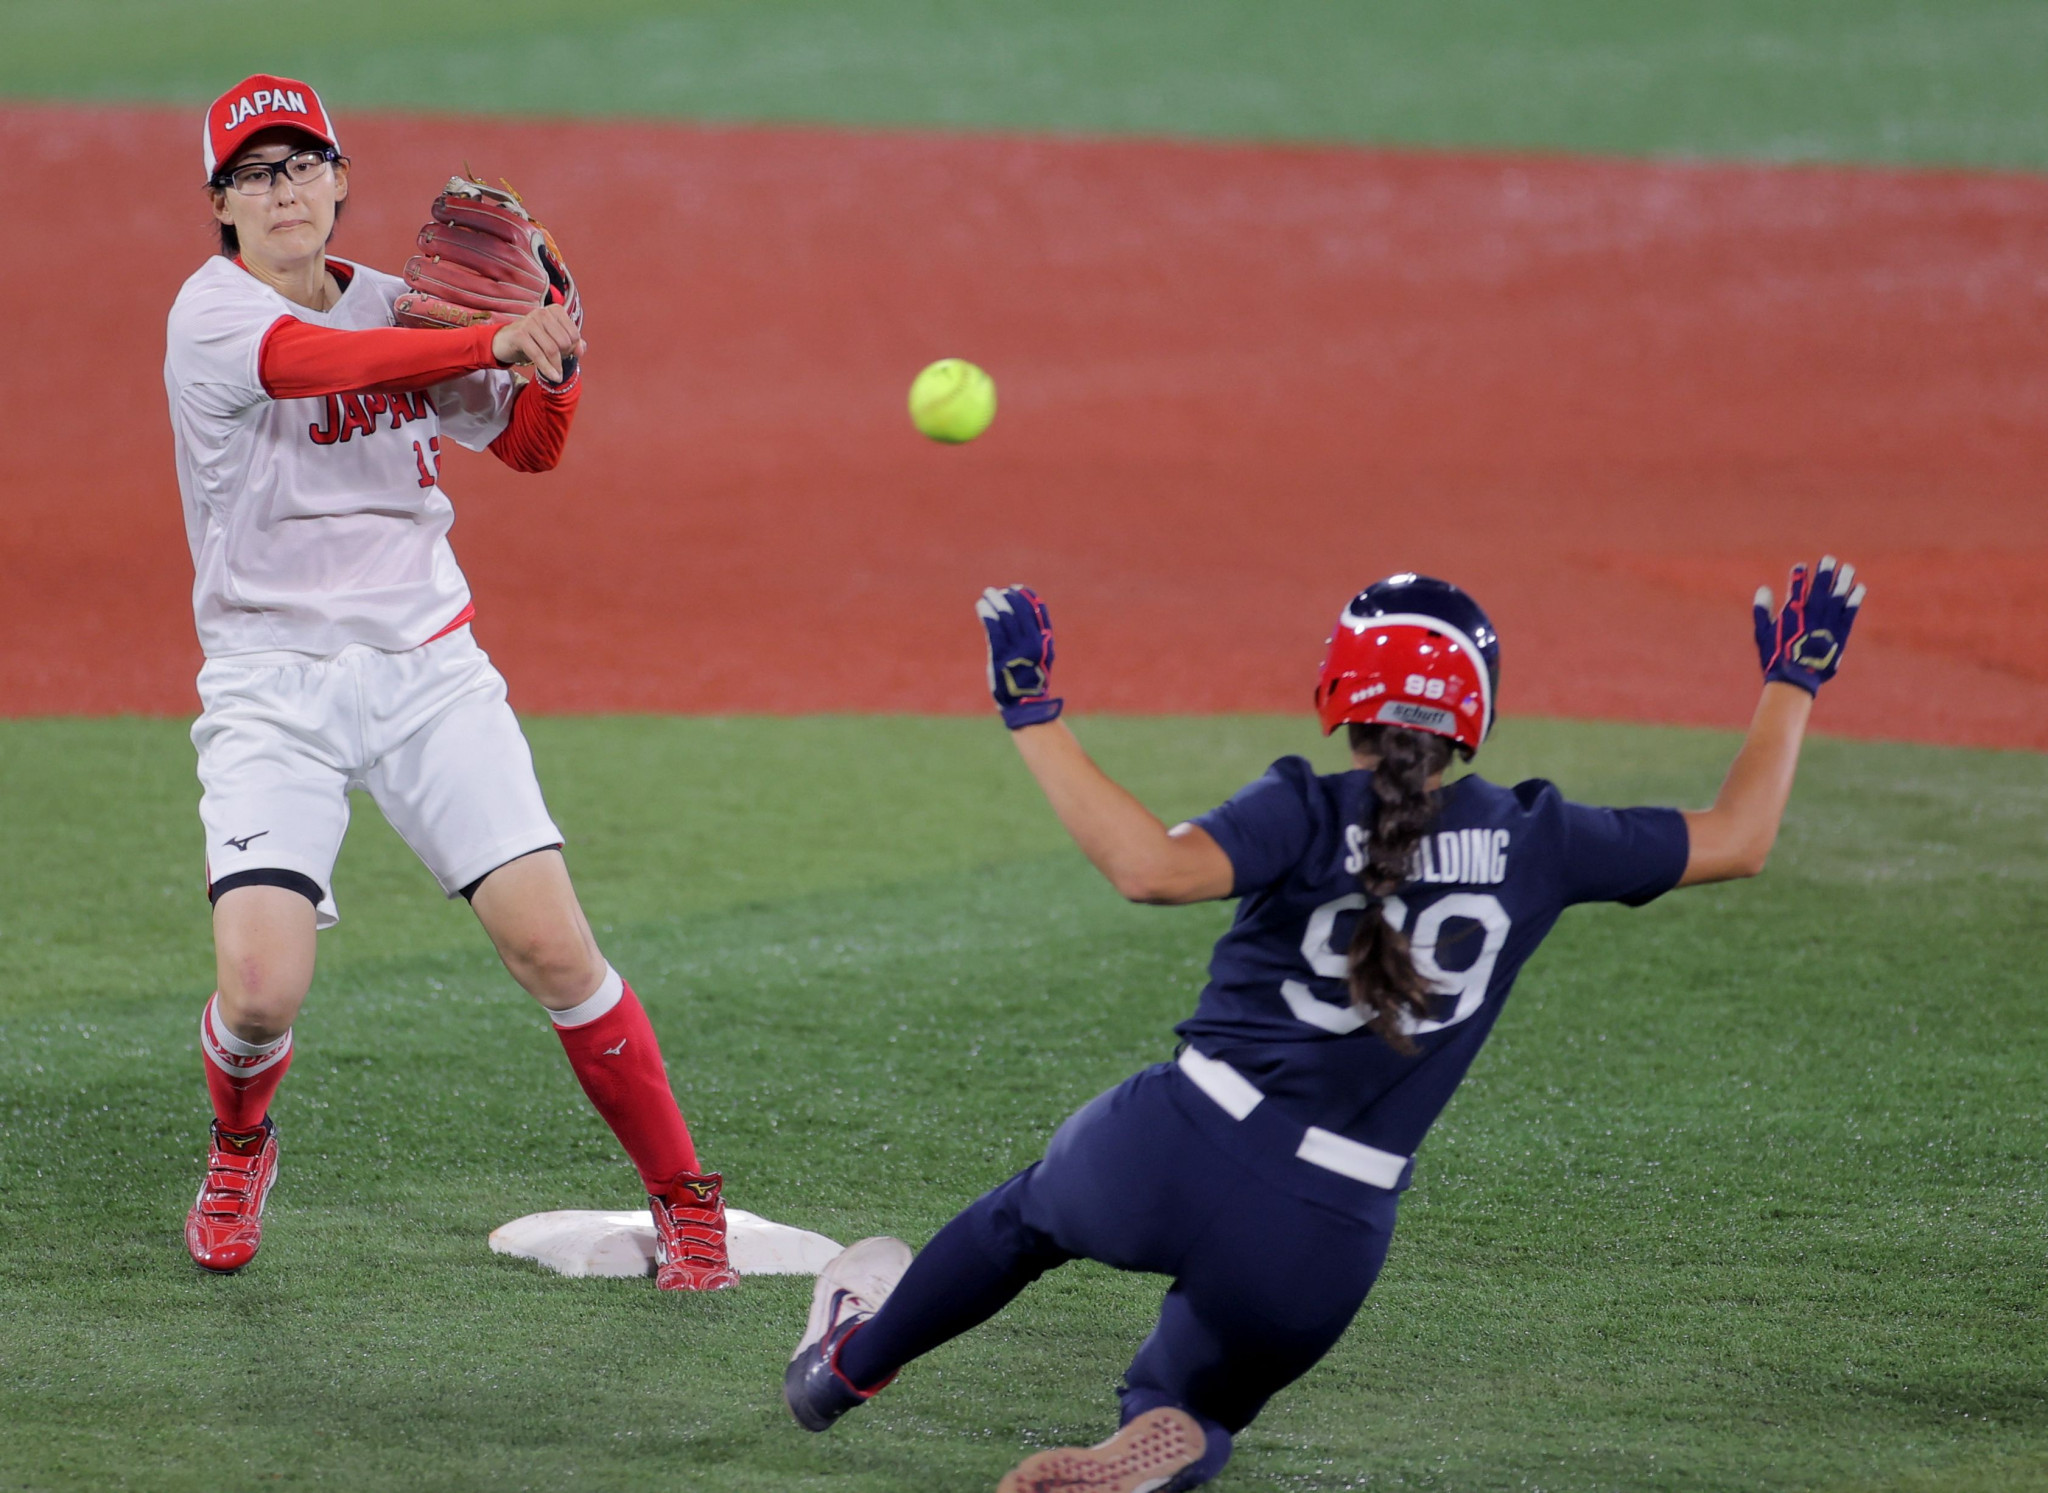 As they did at Beijing 2008, Japan beat the United States in the gold medal match to win the softball tournament at Tokyo 2020 ©Getty Images